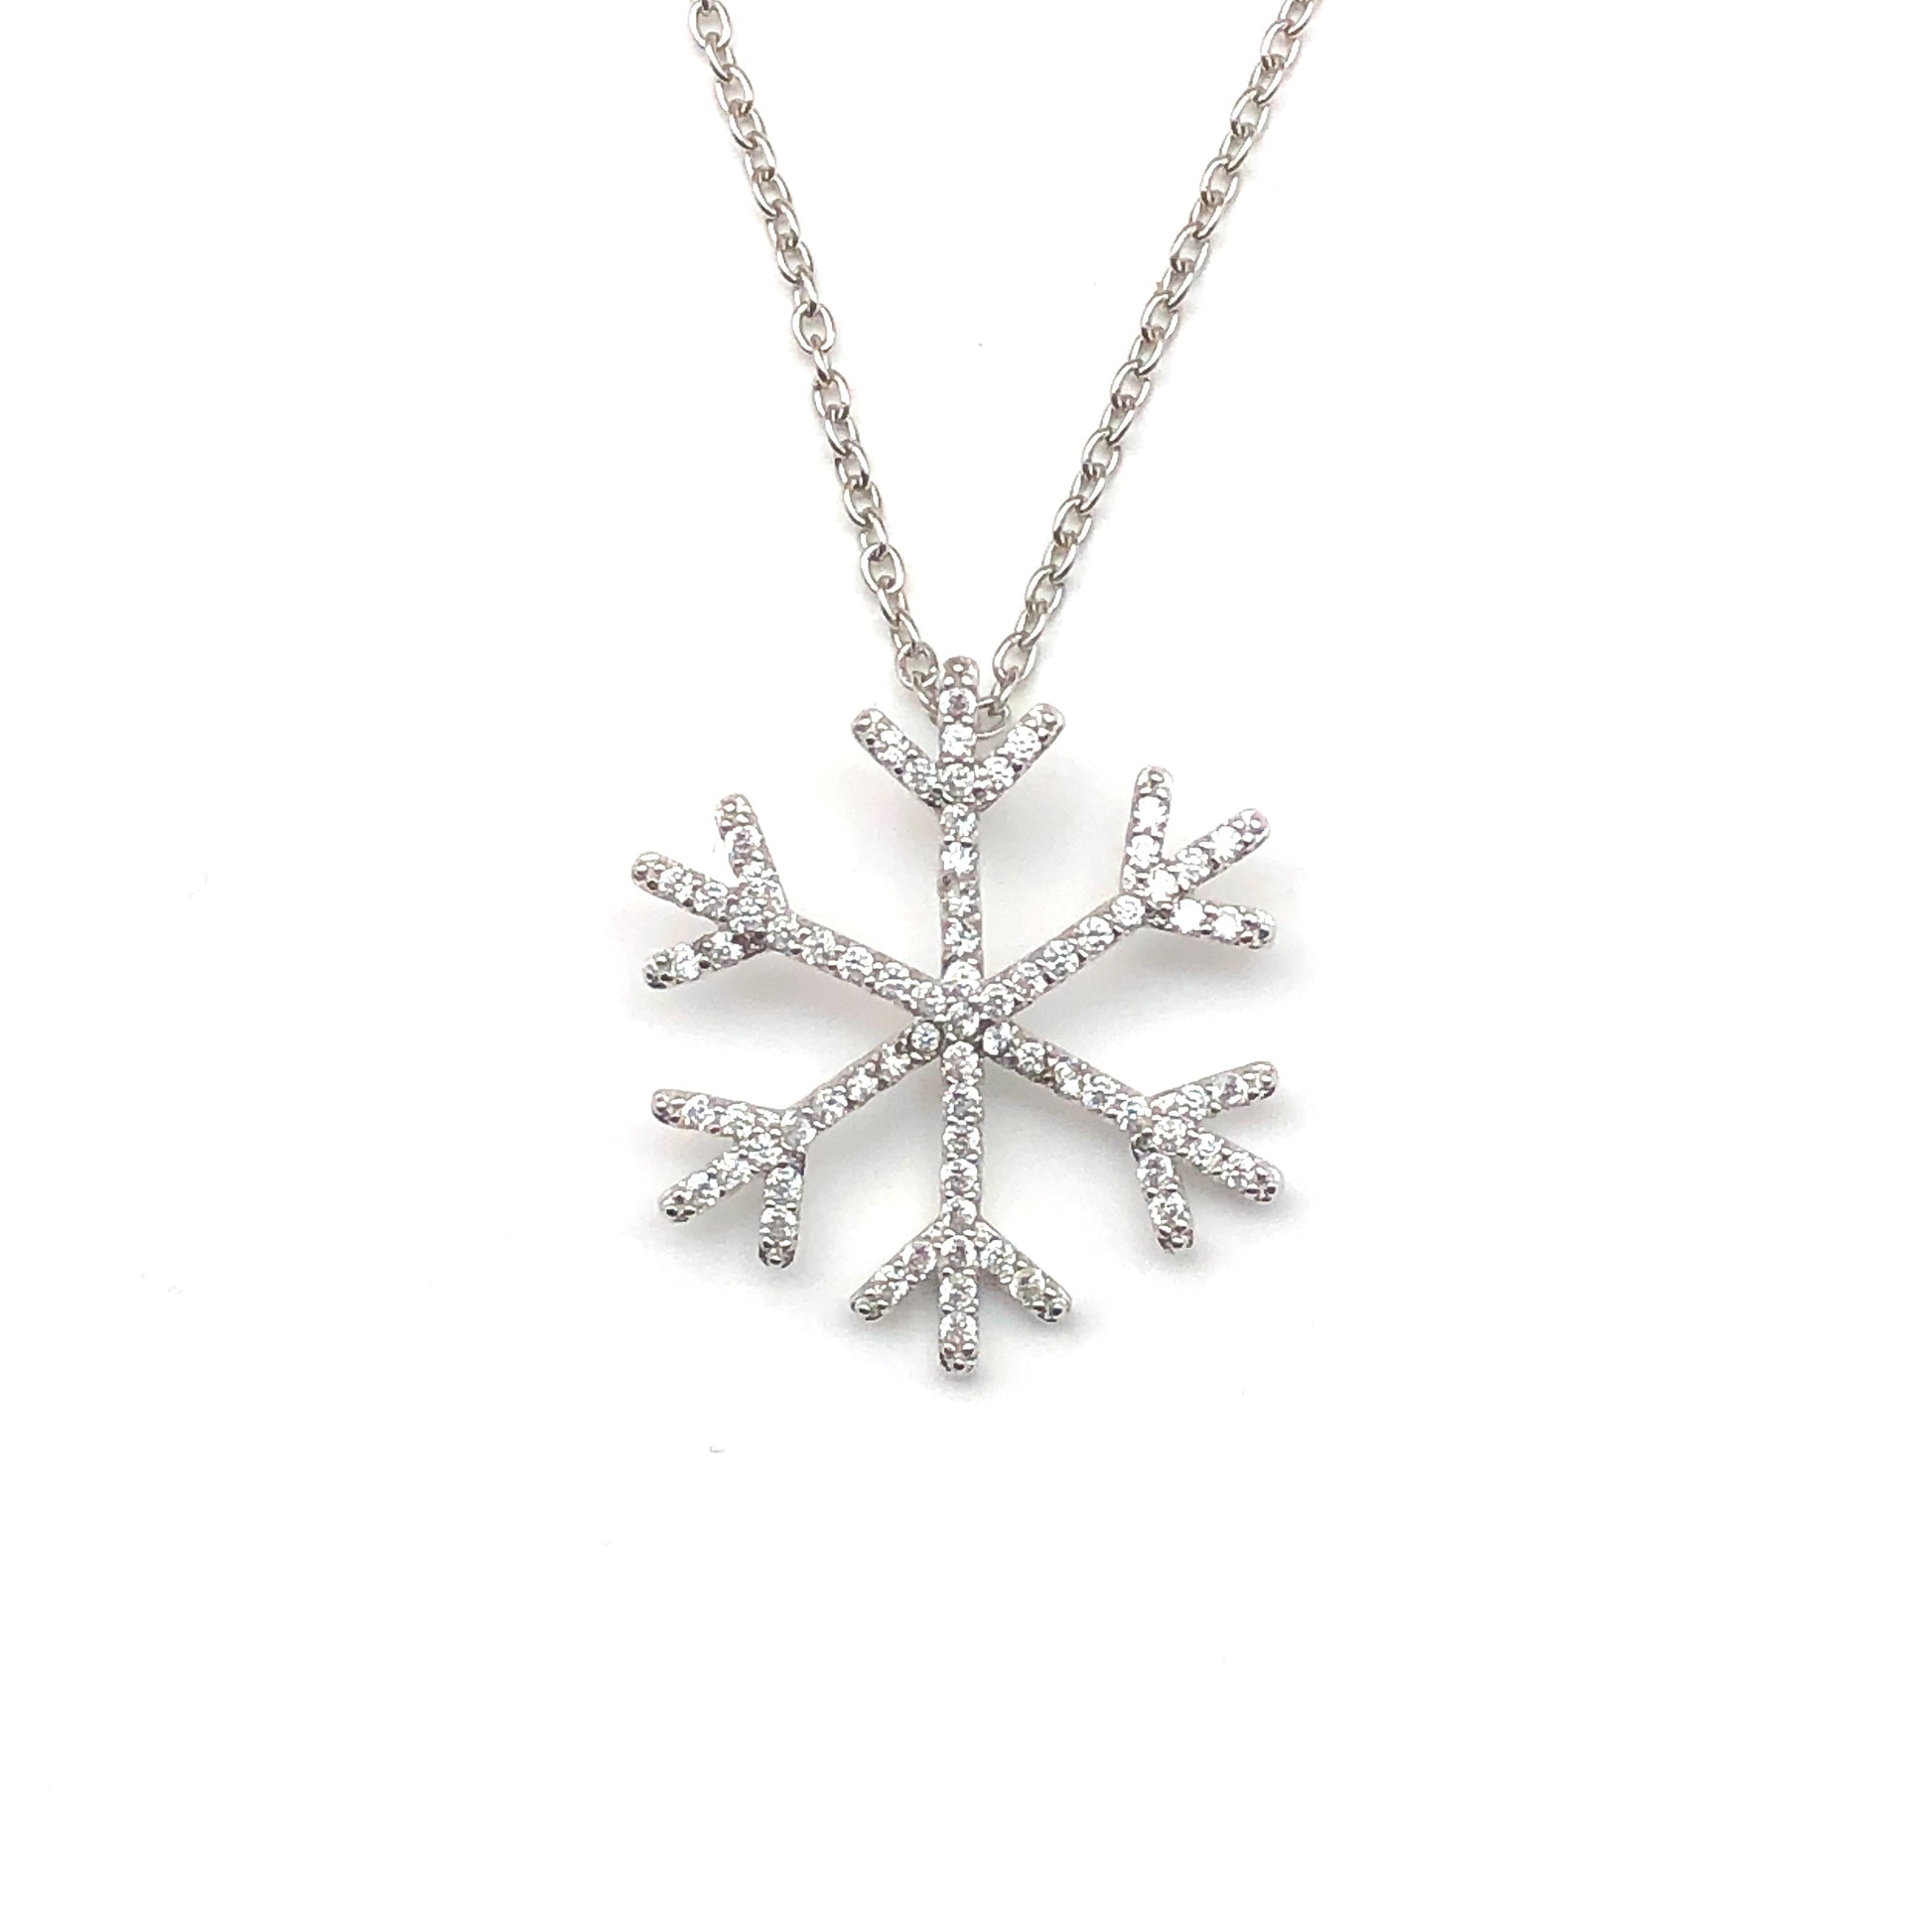 Silver Necklace | Charm Necklace | 925 Sterling Crystalized Snow Flurry Pendant Necklace